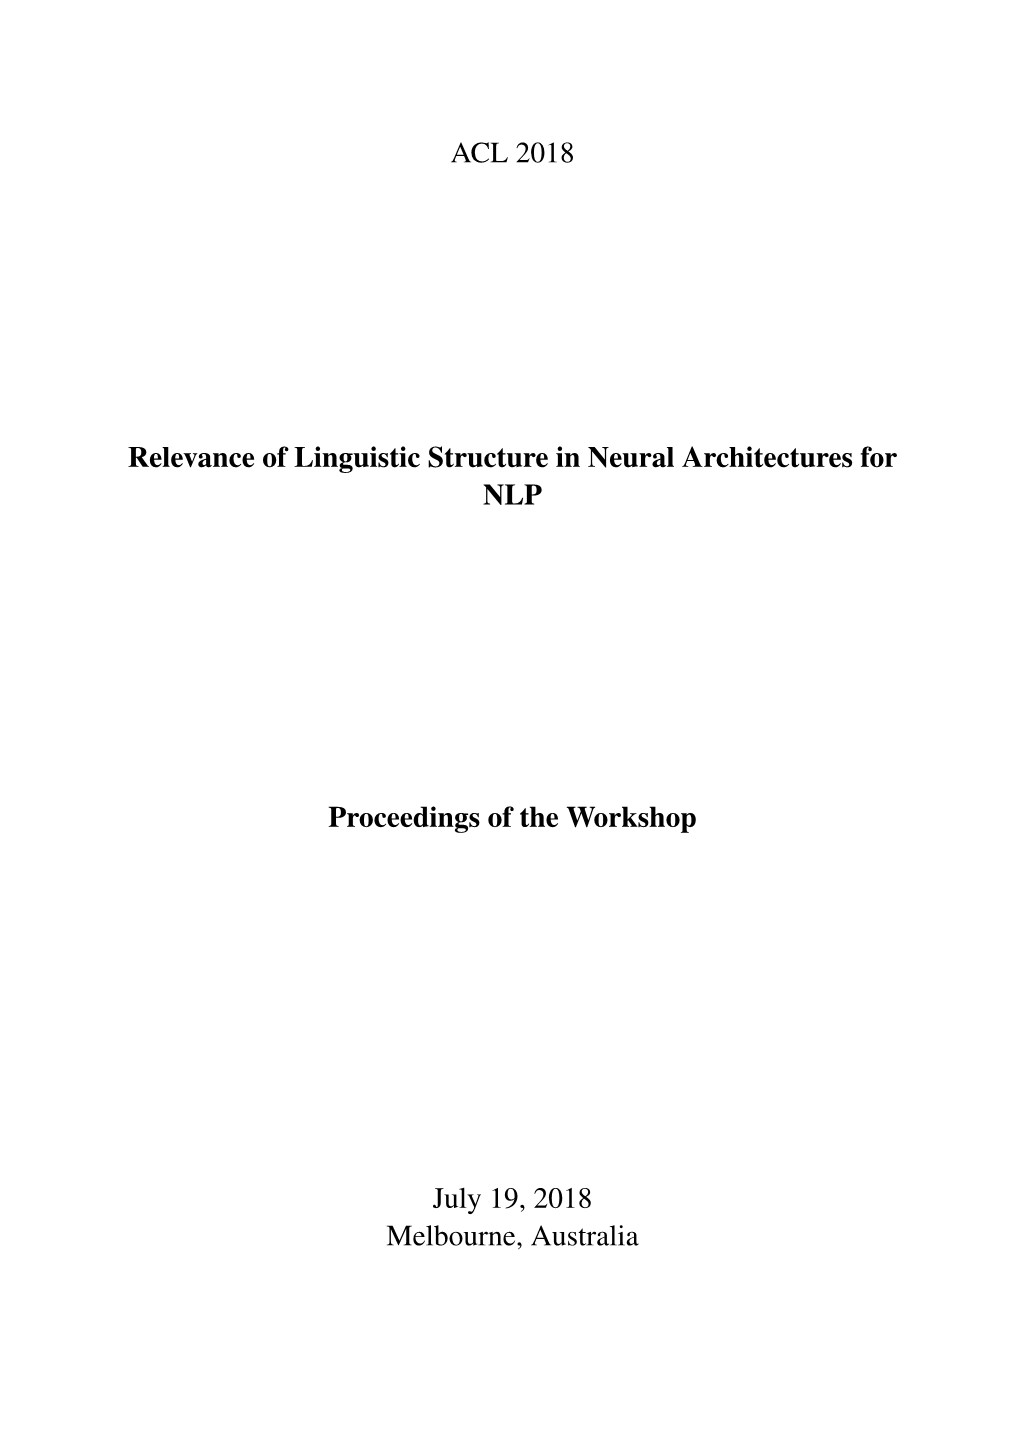 Proceedings of the Workshop on the Relevance of Linguistic Structure in Neural Architectures for NLP, Pages 1–5 Melbourne, Australia, July 19, 2018